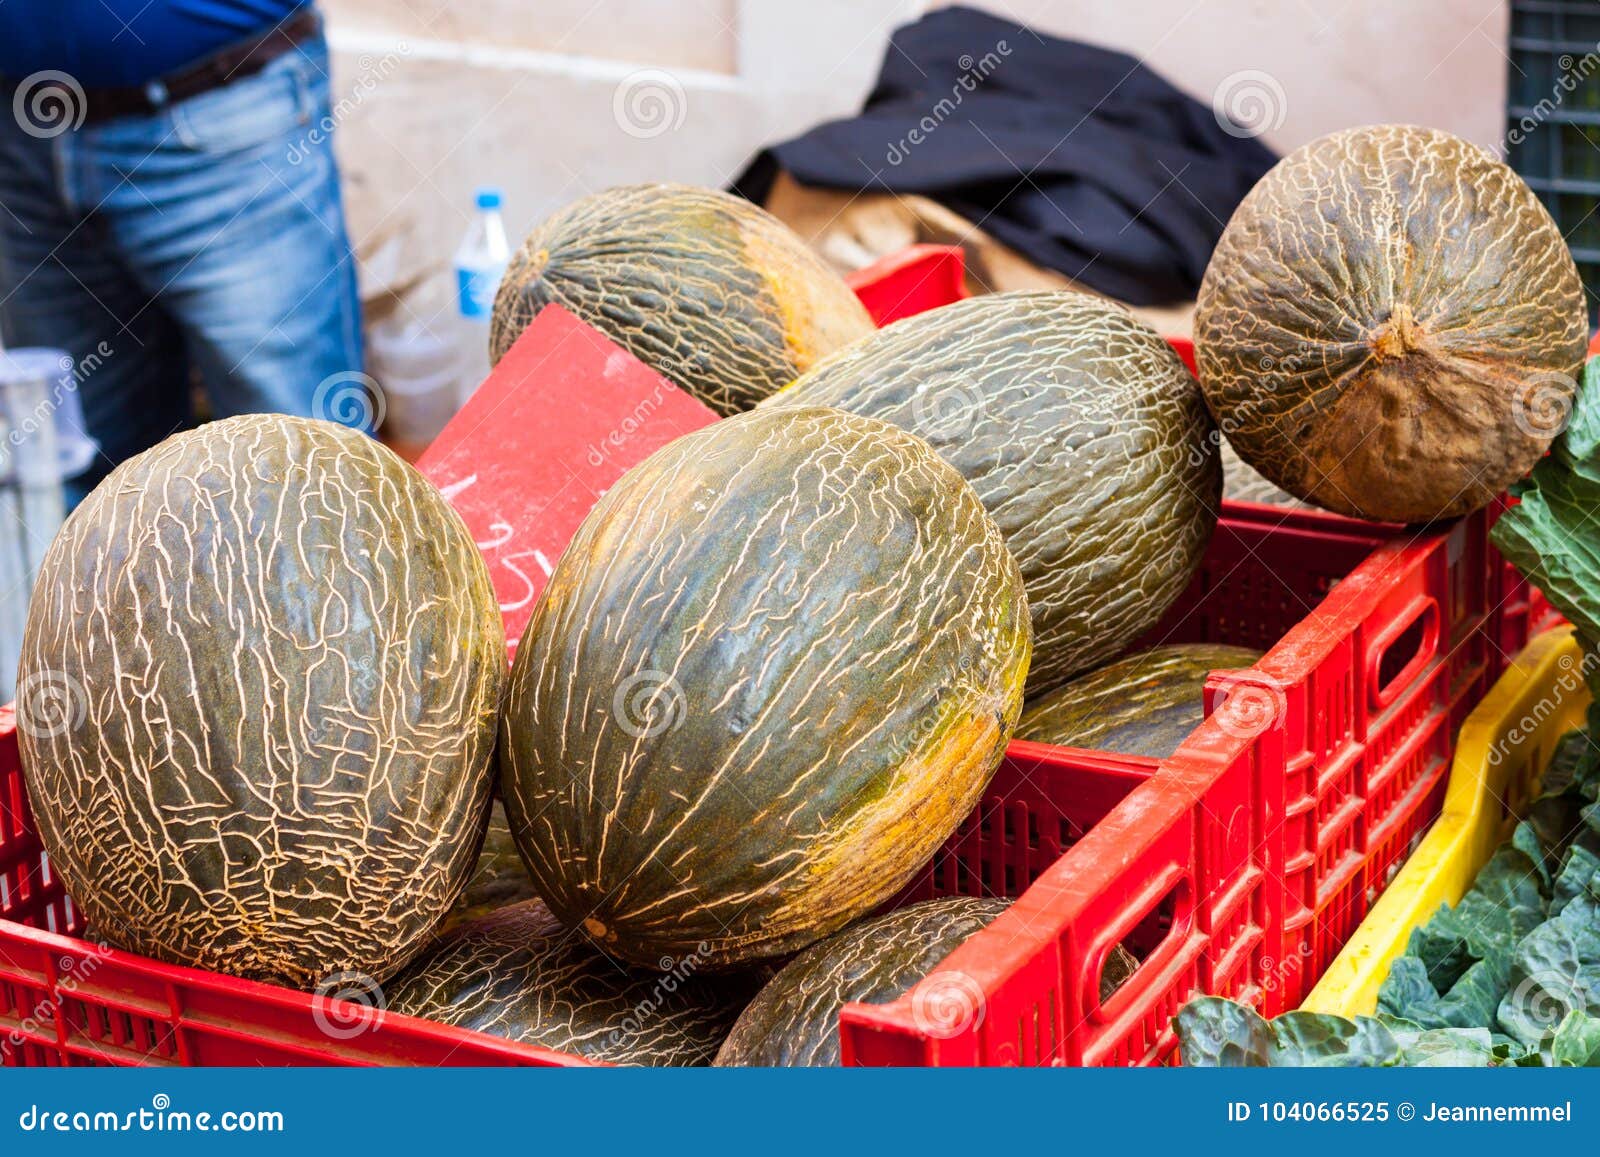 green oval santa claus melons also known as `piel de sapo` `toad skin` melons for sale at sineu market, majorca